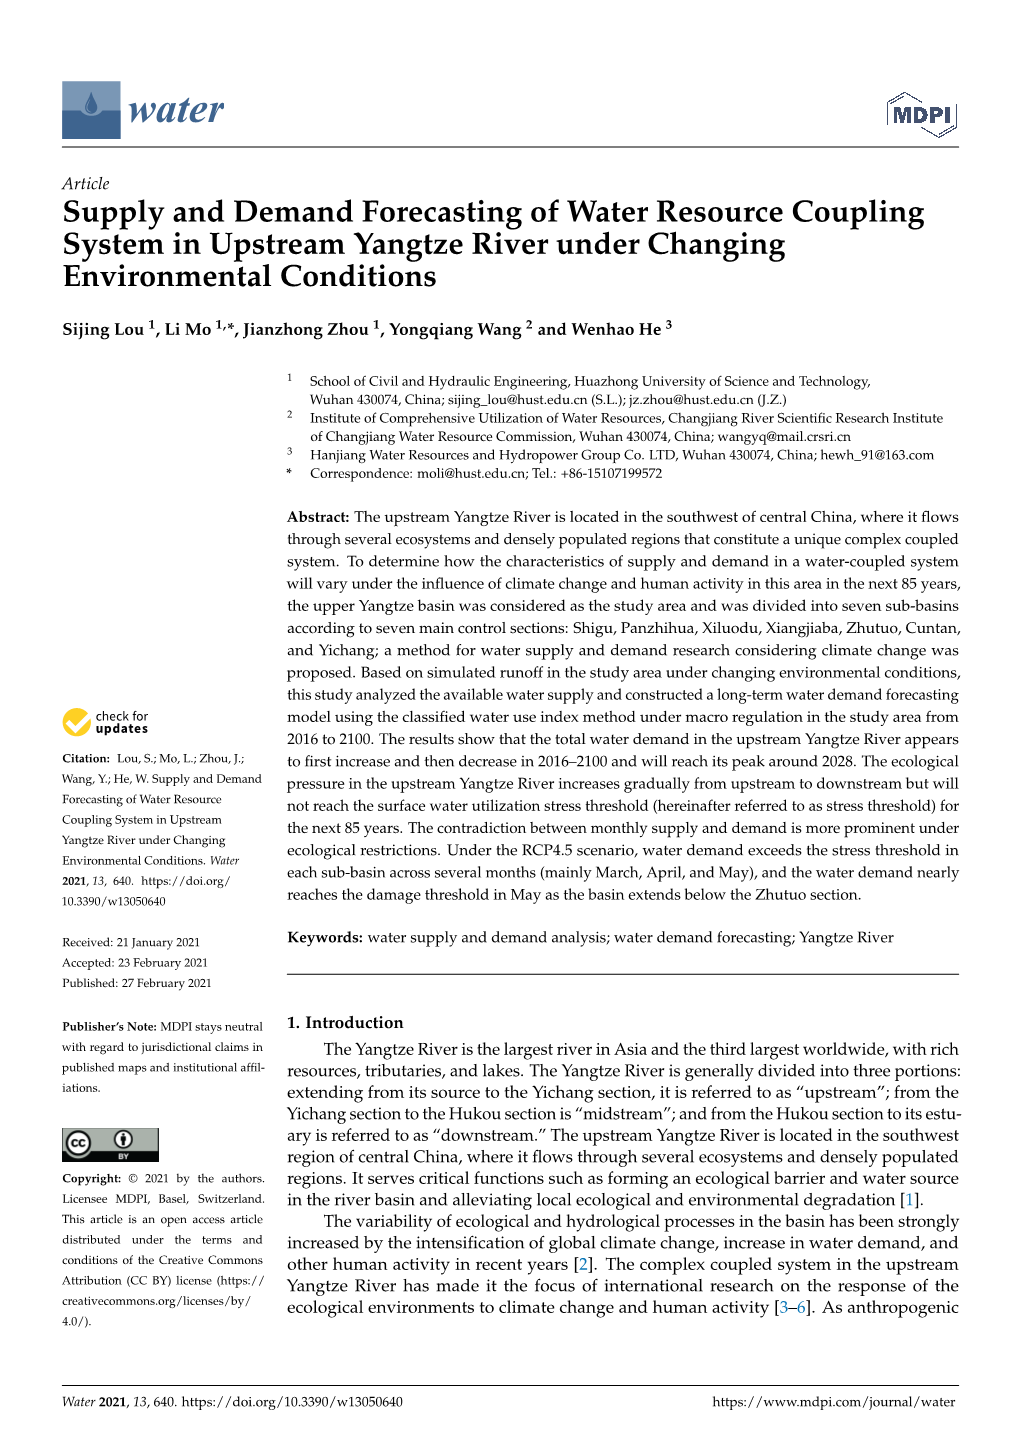 Supply and Demand Forecasting of Water Resource Coupling System in Upstream Yangtze River Under Changing Environmental Conditions